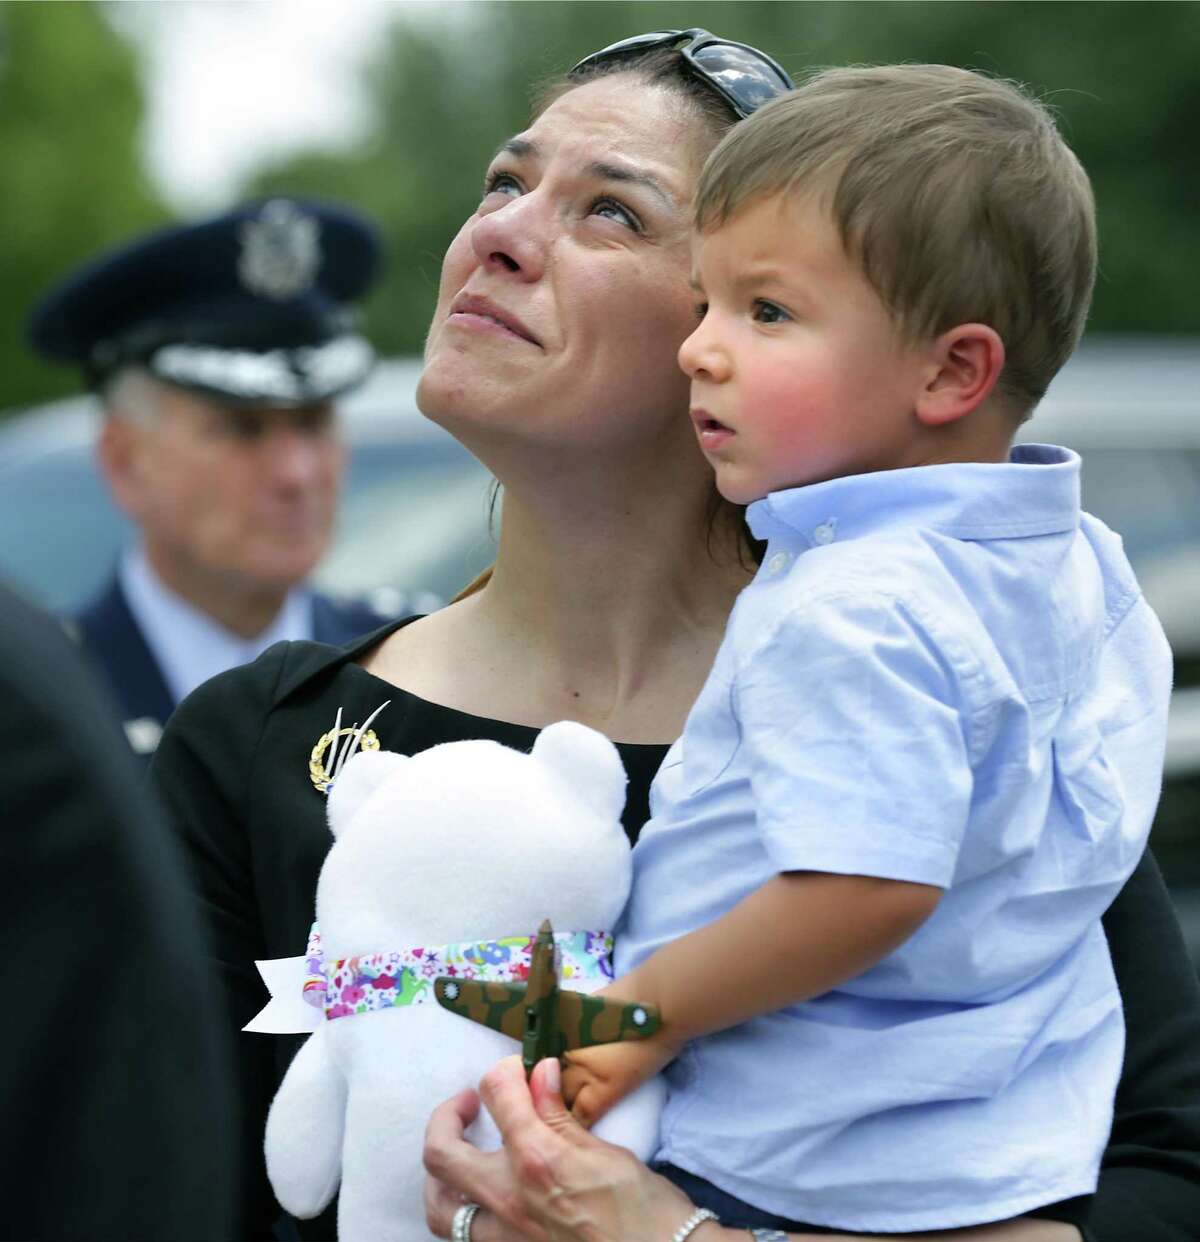 Sammi Bonney, left, holds her son Ben Bonney, 2, great grandson of Oliver "Ollie" Crawford, who holds a toy Curtiss P-40 Warhawk plane, as four F-16s pass overhead at Crawford's funeral at Fort Sam Houston National Cemetery on Monday.